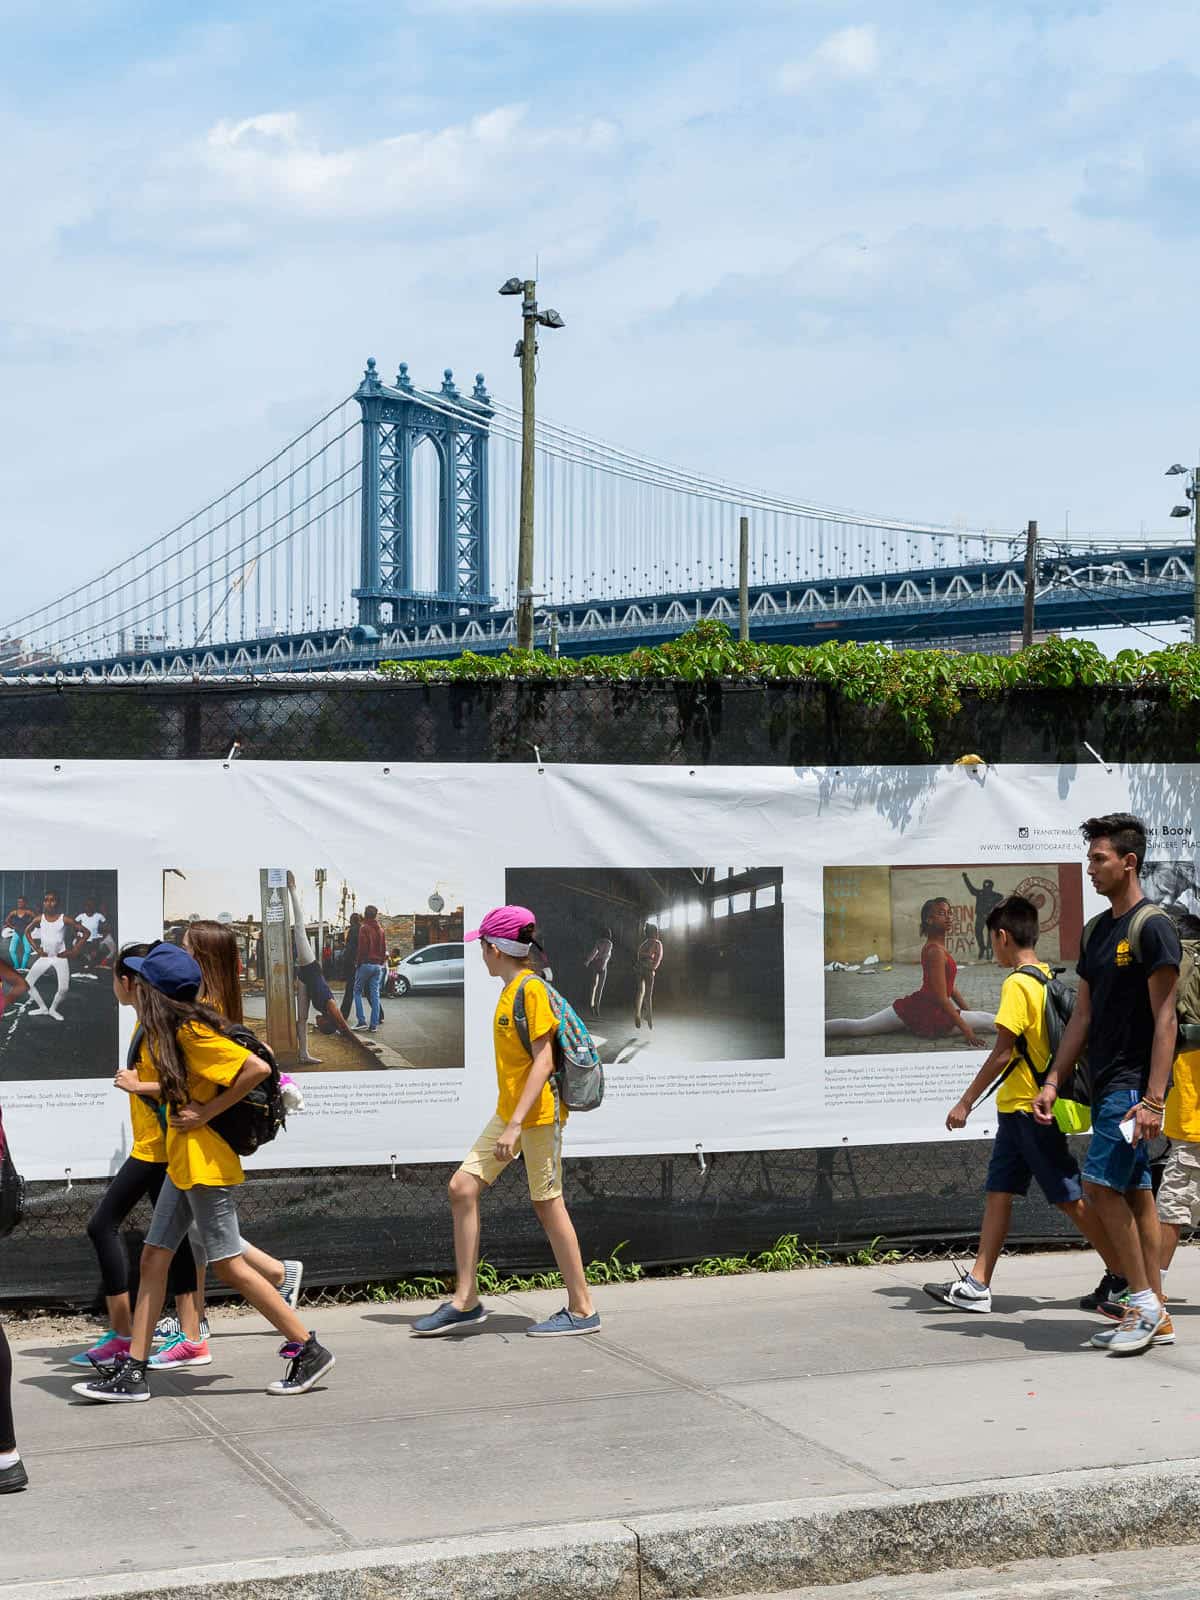 Children walking by a photo banner attached to a chain link fence on a sunny day.